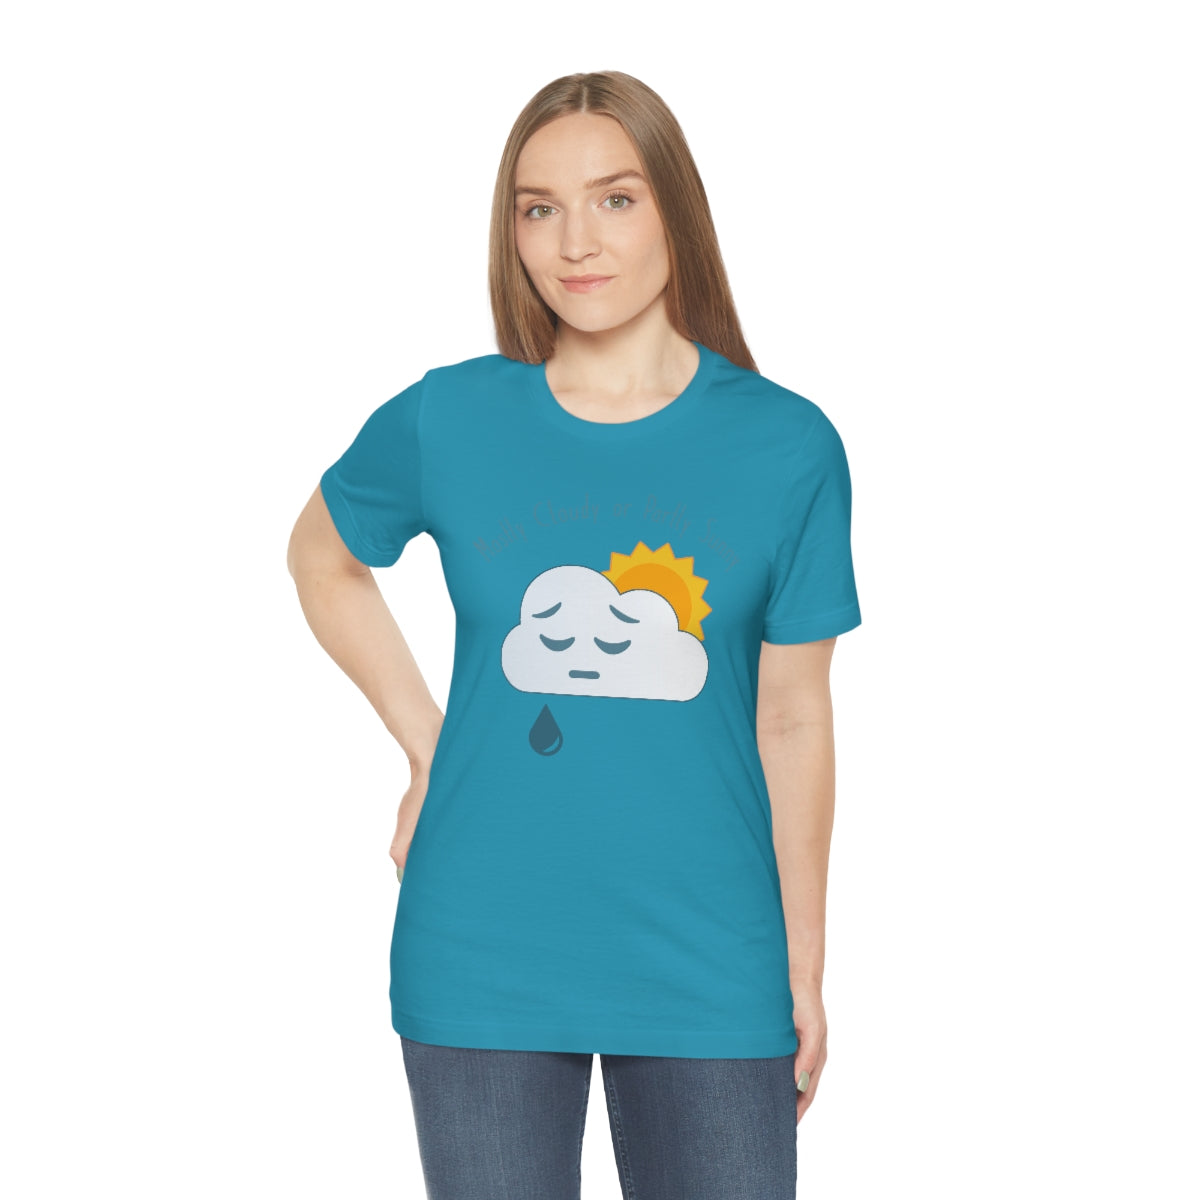 Mostly Cloudy Tee 